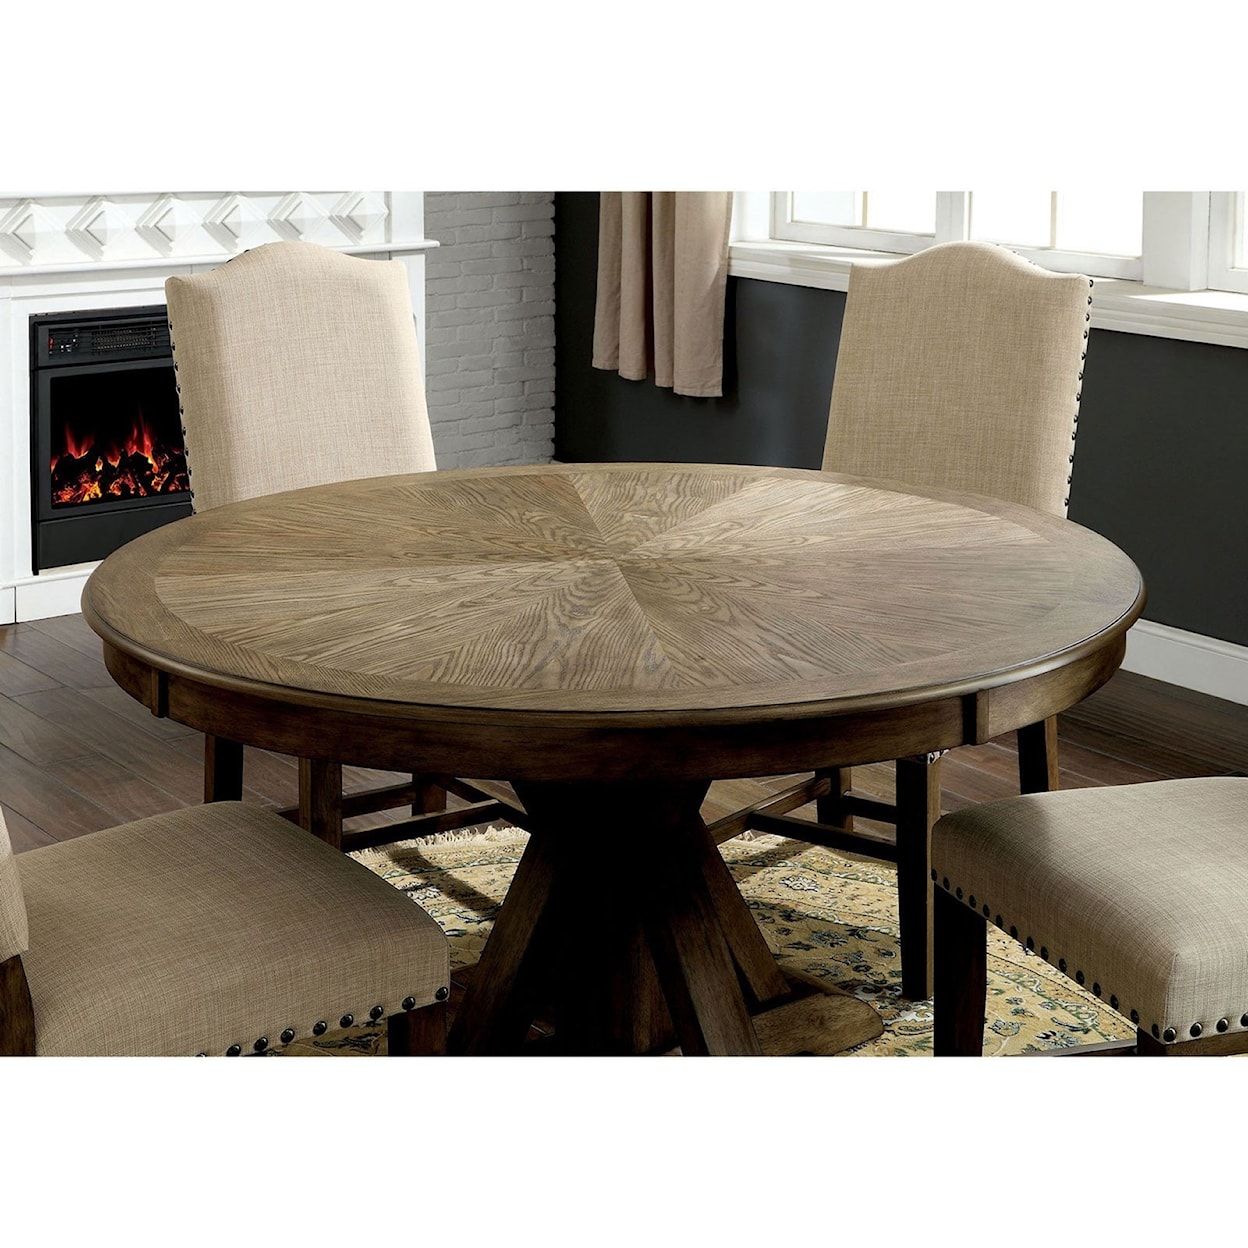 FUSA Julia Round Table + 4 Side Chairs